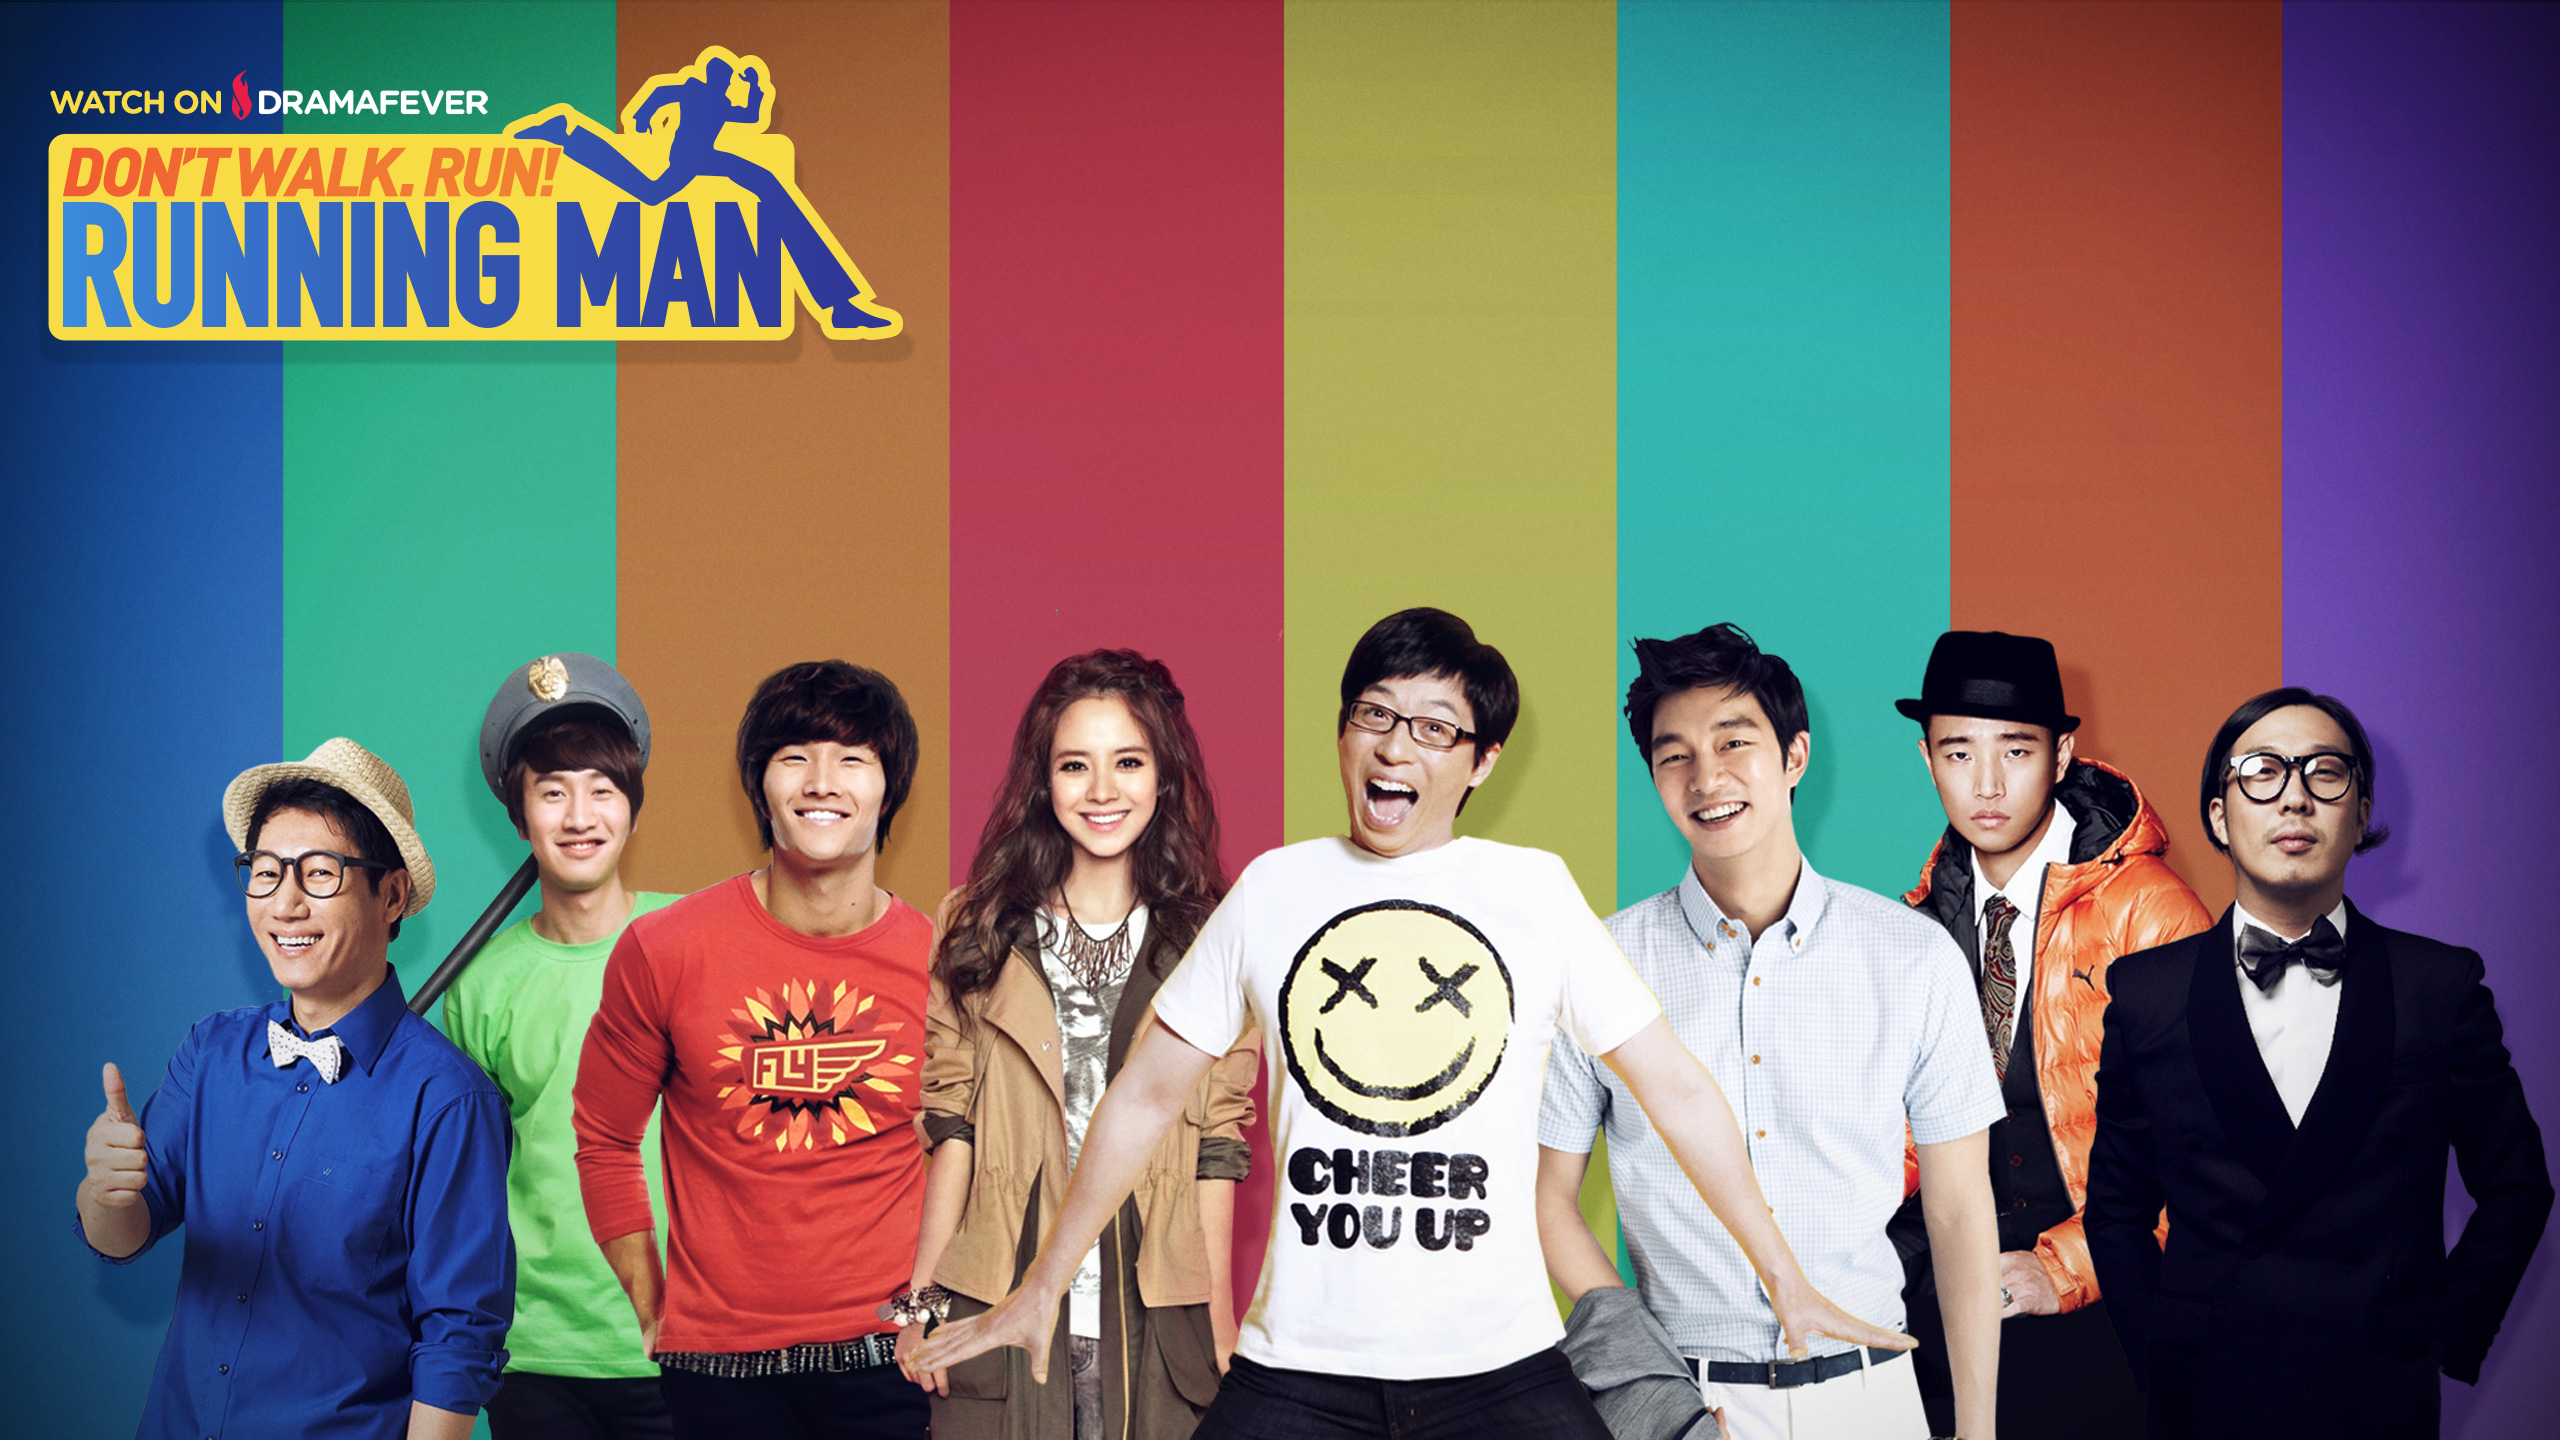 Running Man Wallpaper For Your Desktop iPhone iPad And